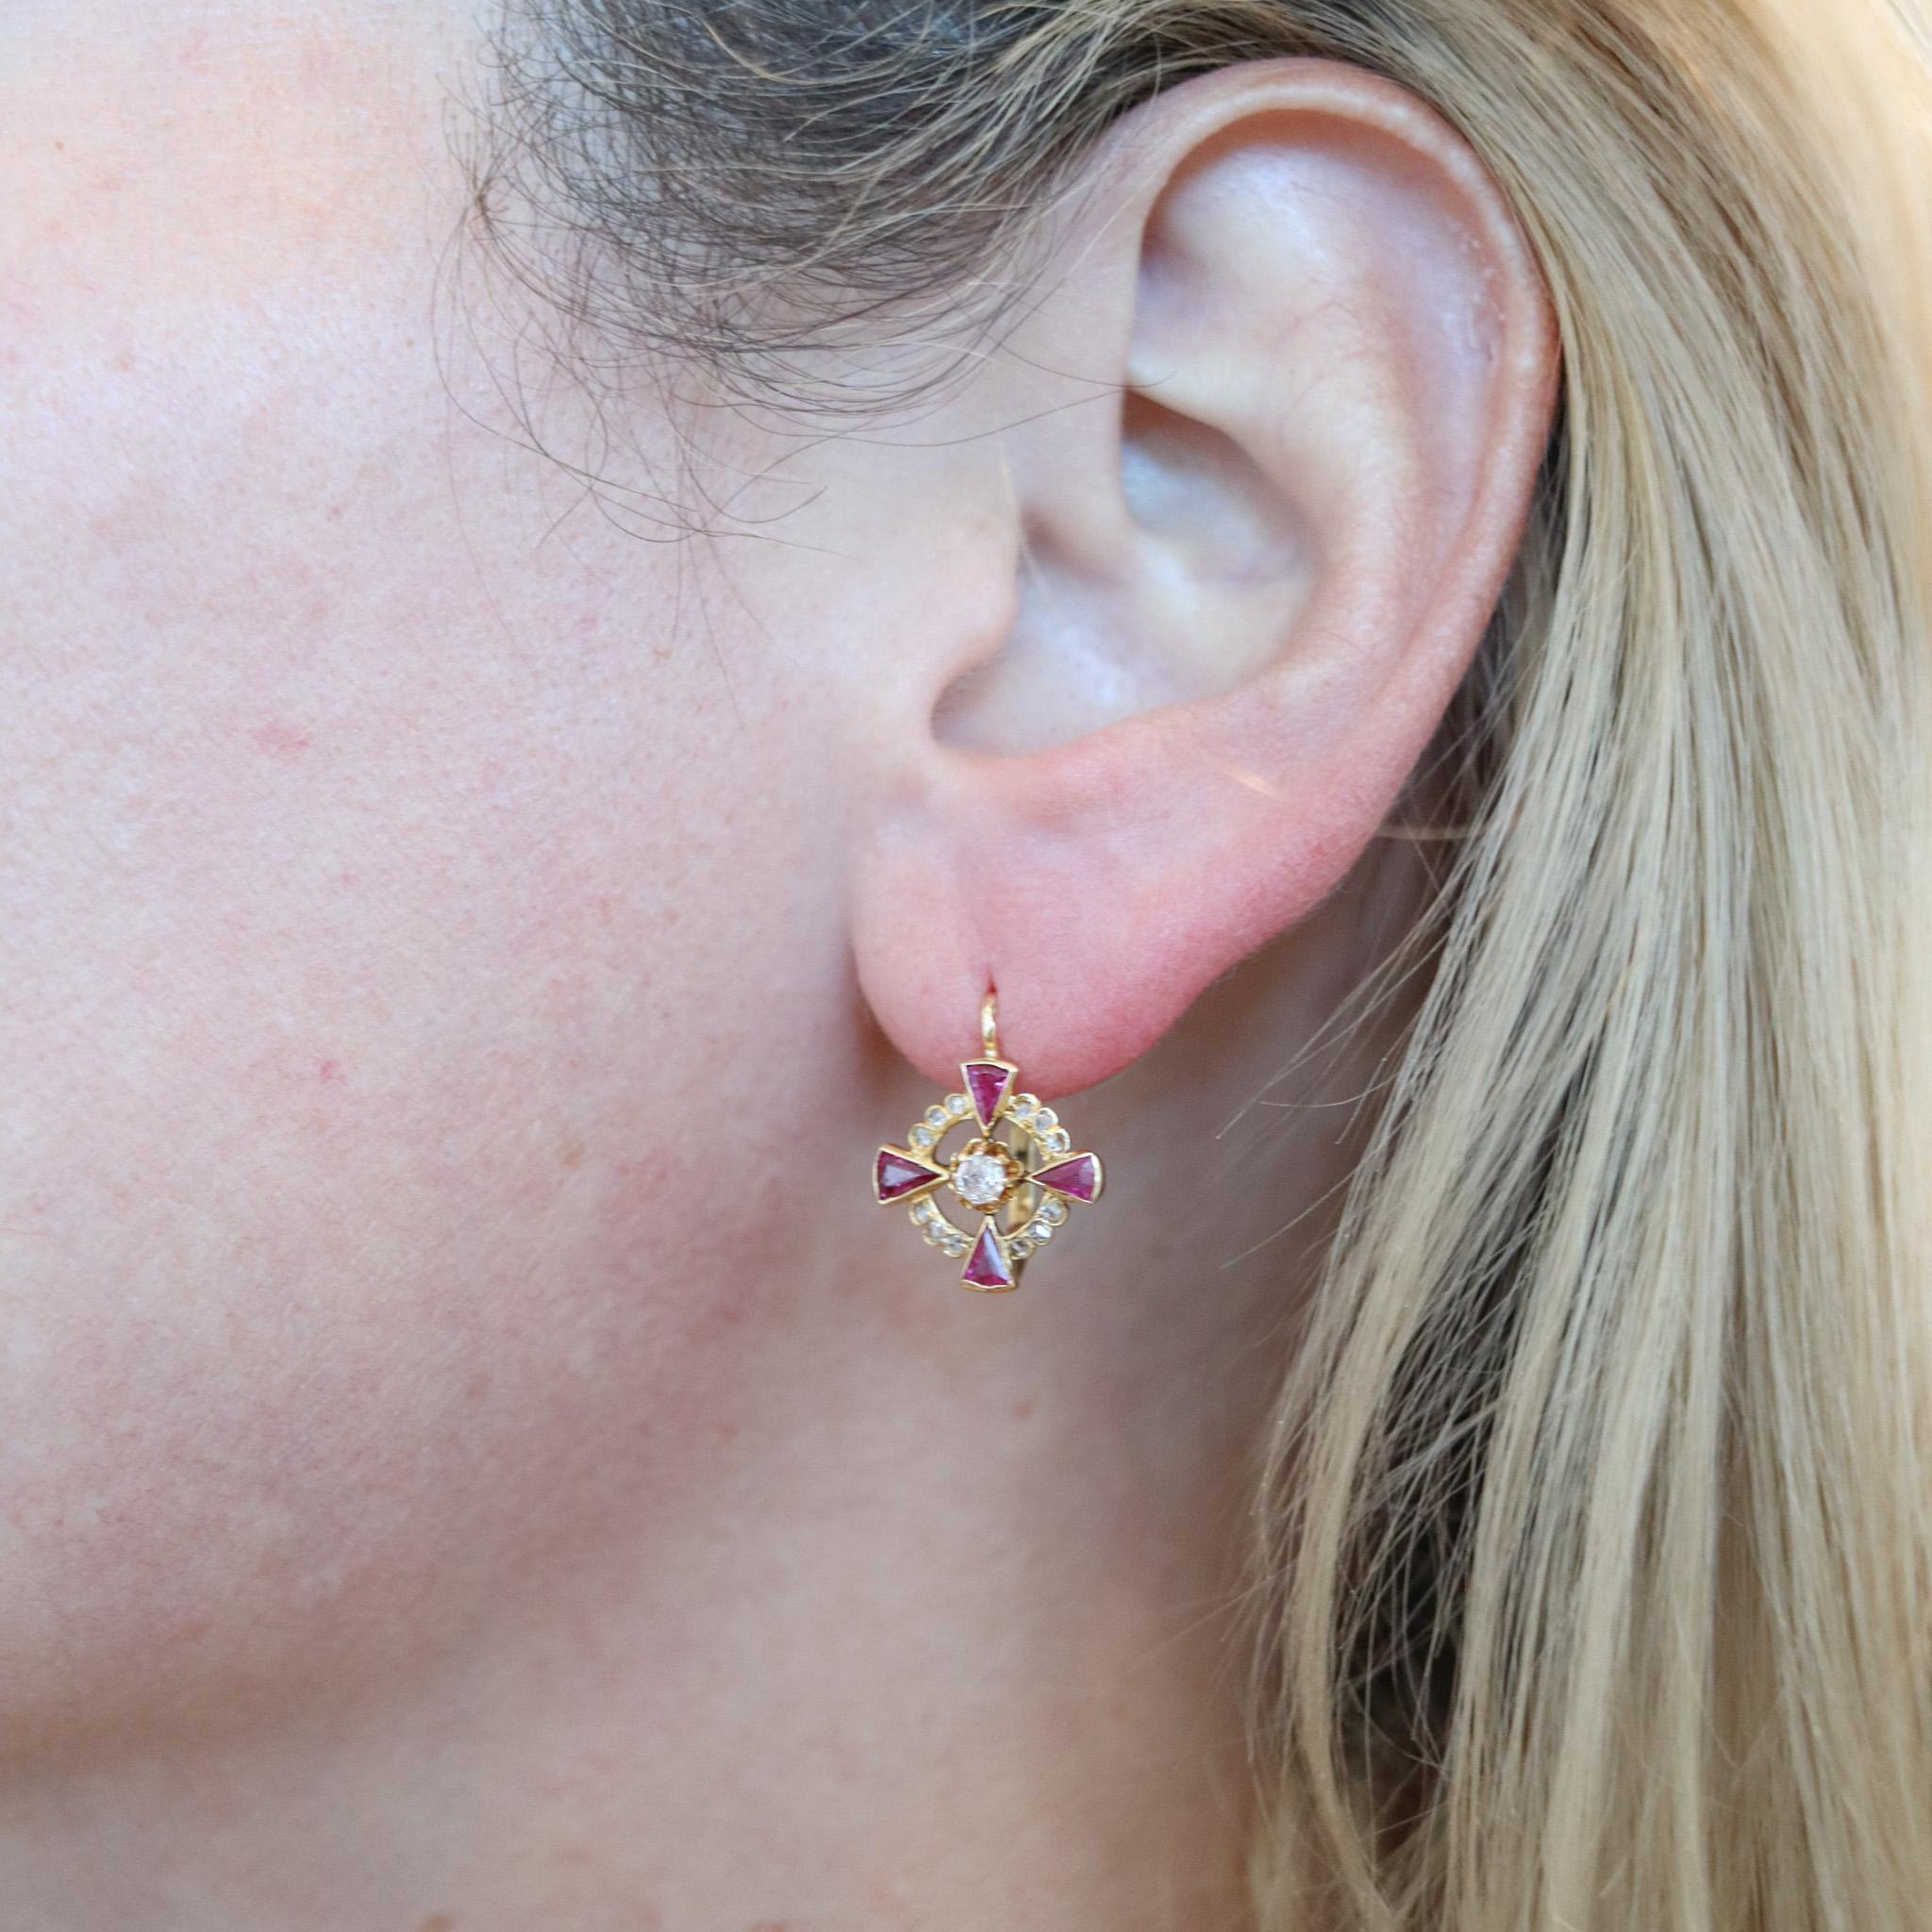 Women's French 1905 Edwardian Earrings in 18kt Gold with Diamonds and Red Burmese Rubies